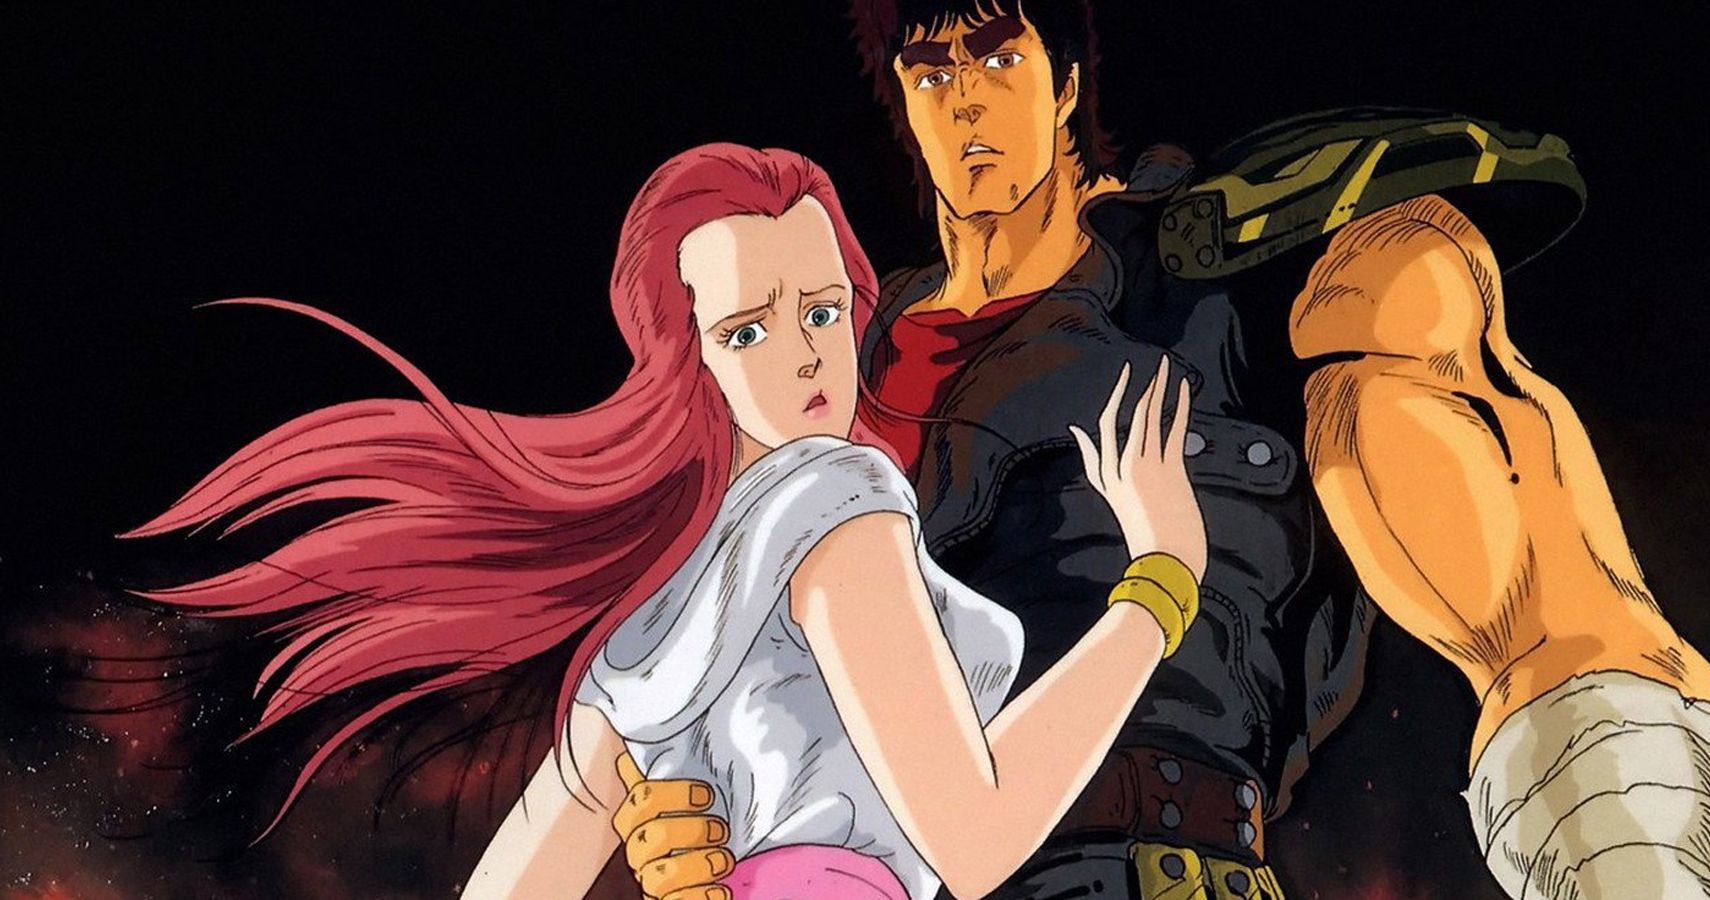 15 Classic Anime Shows That Are Overrated (And 15 Worth A Second Look)